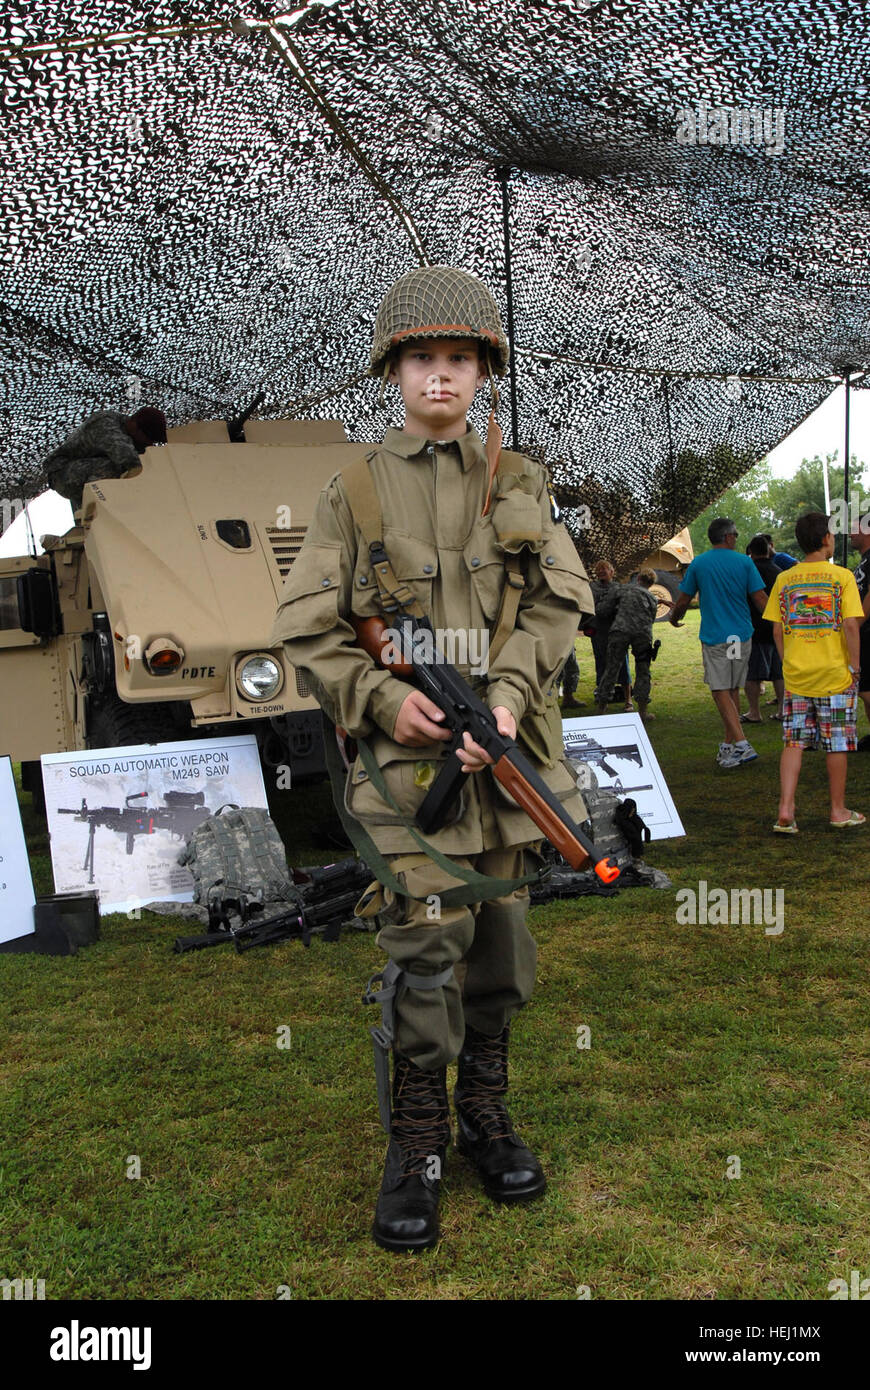 photo by Spc. Gregory Argentieri/49th PAD A young boy dressed in a old paratrooper uniform stands ready during the 69th National Airborne Day celebration at the Airborne and Special Operations Museum in downtown Fayetteville, Saturday. This young boy was not alone. Many volunteer re-enactors came out for Airborne day dressed in authentic uniforms from WWII through present day, and many displayed weapons and equipment from these bygone eras. Flickr - The U.S. Army - 69th National Airborne Day Stock Photo